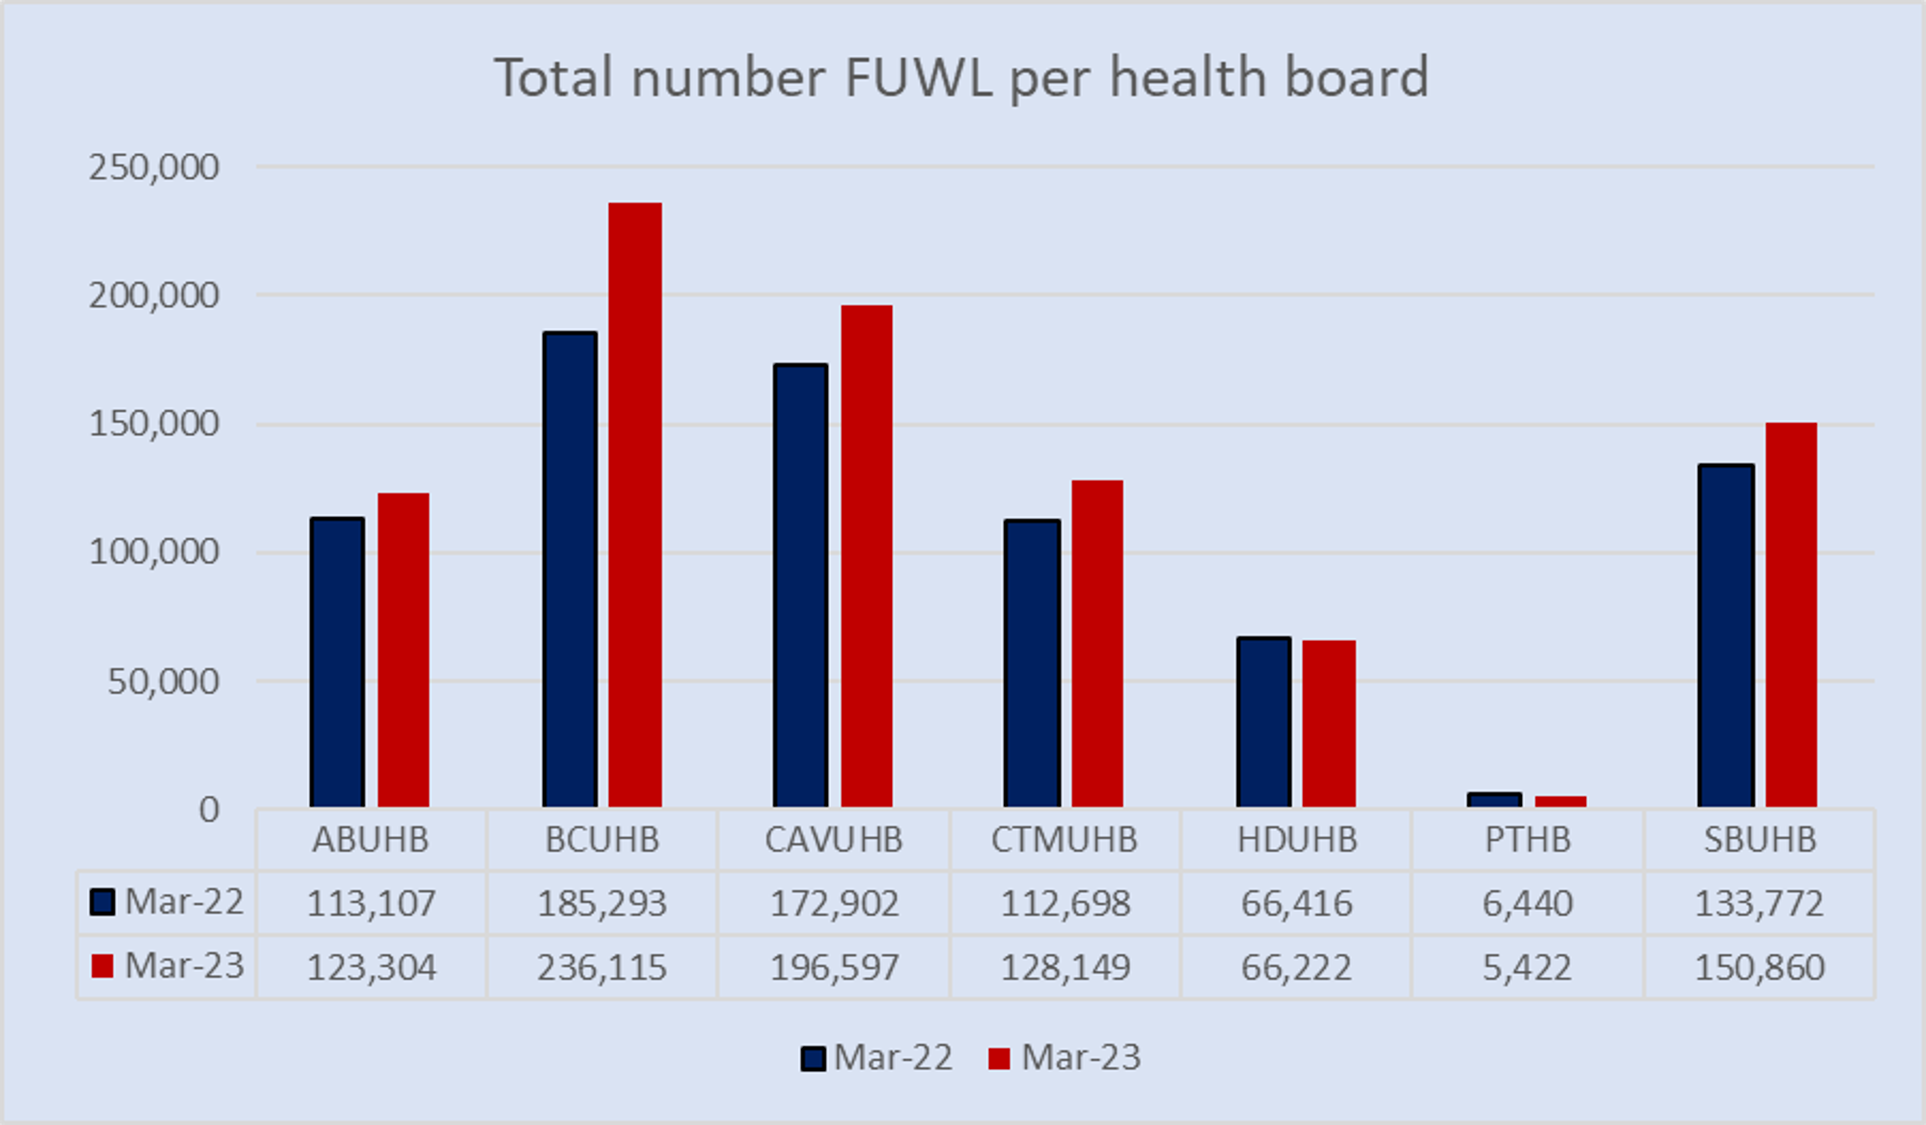 Bar chart on the number of follow up appointments per health board between March 2022 to 2023.